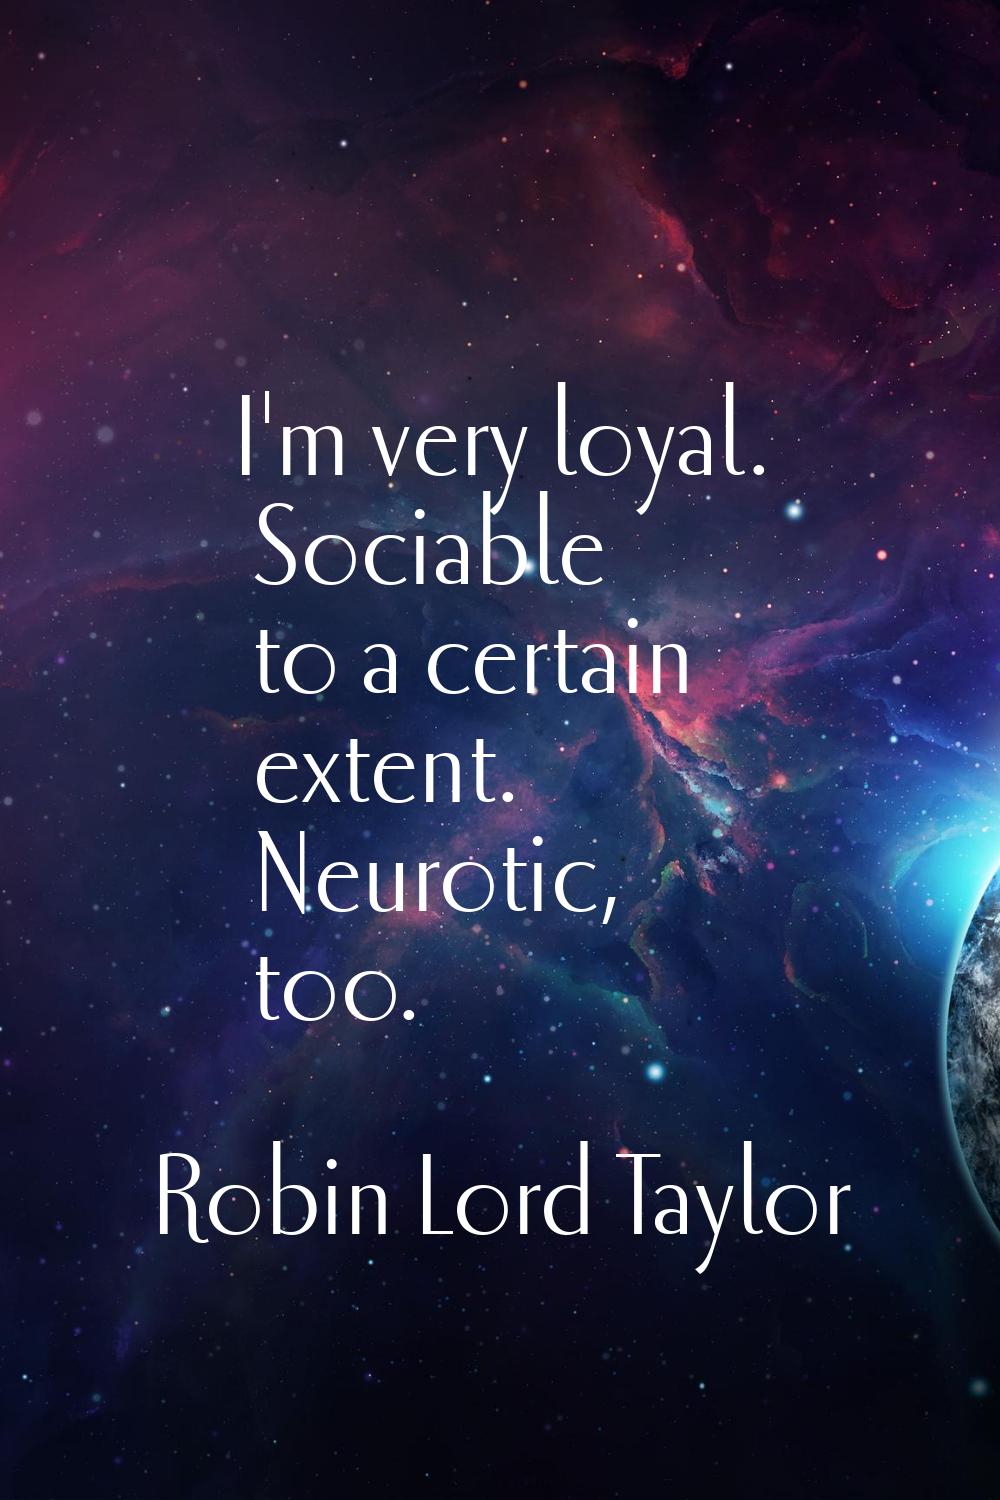 I'm very loyal. Sociable to a certain extent. Neurotic, too.